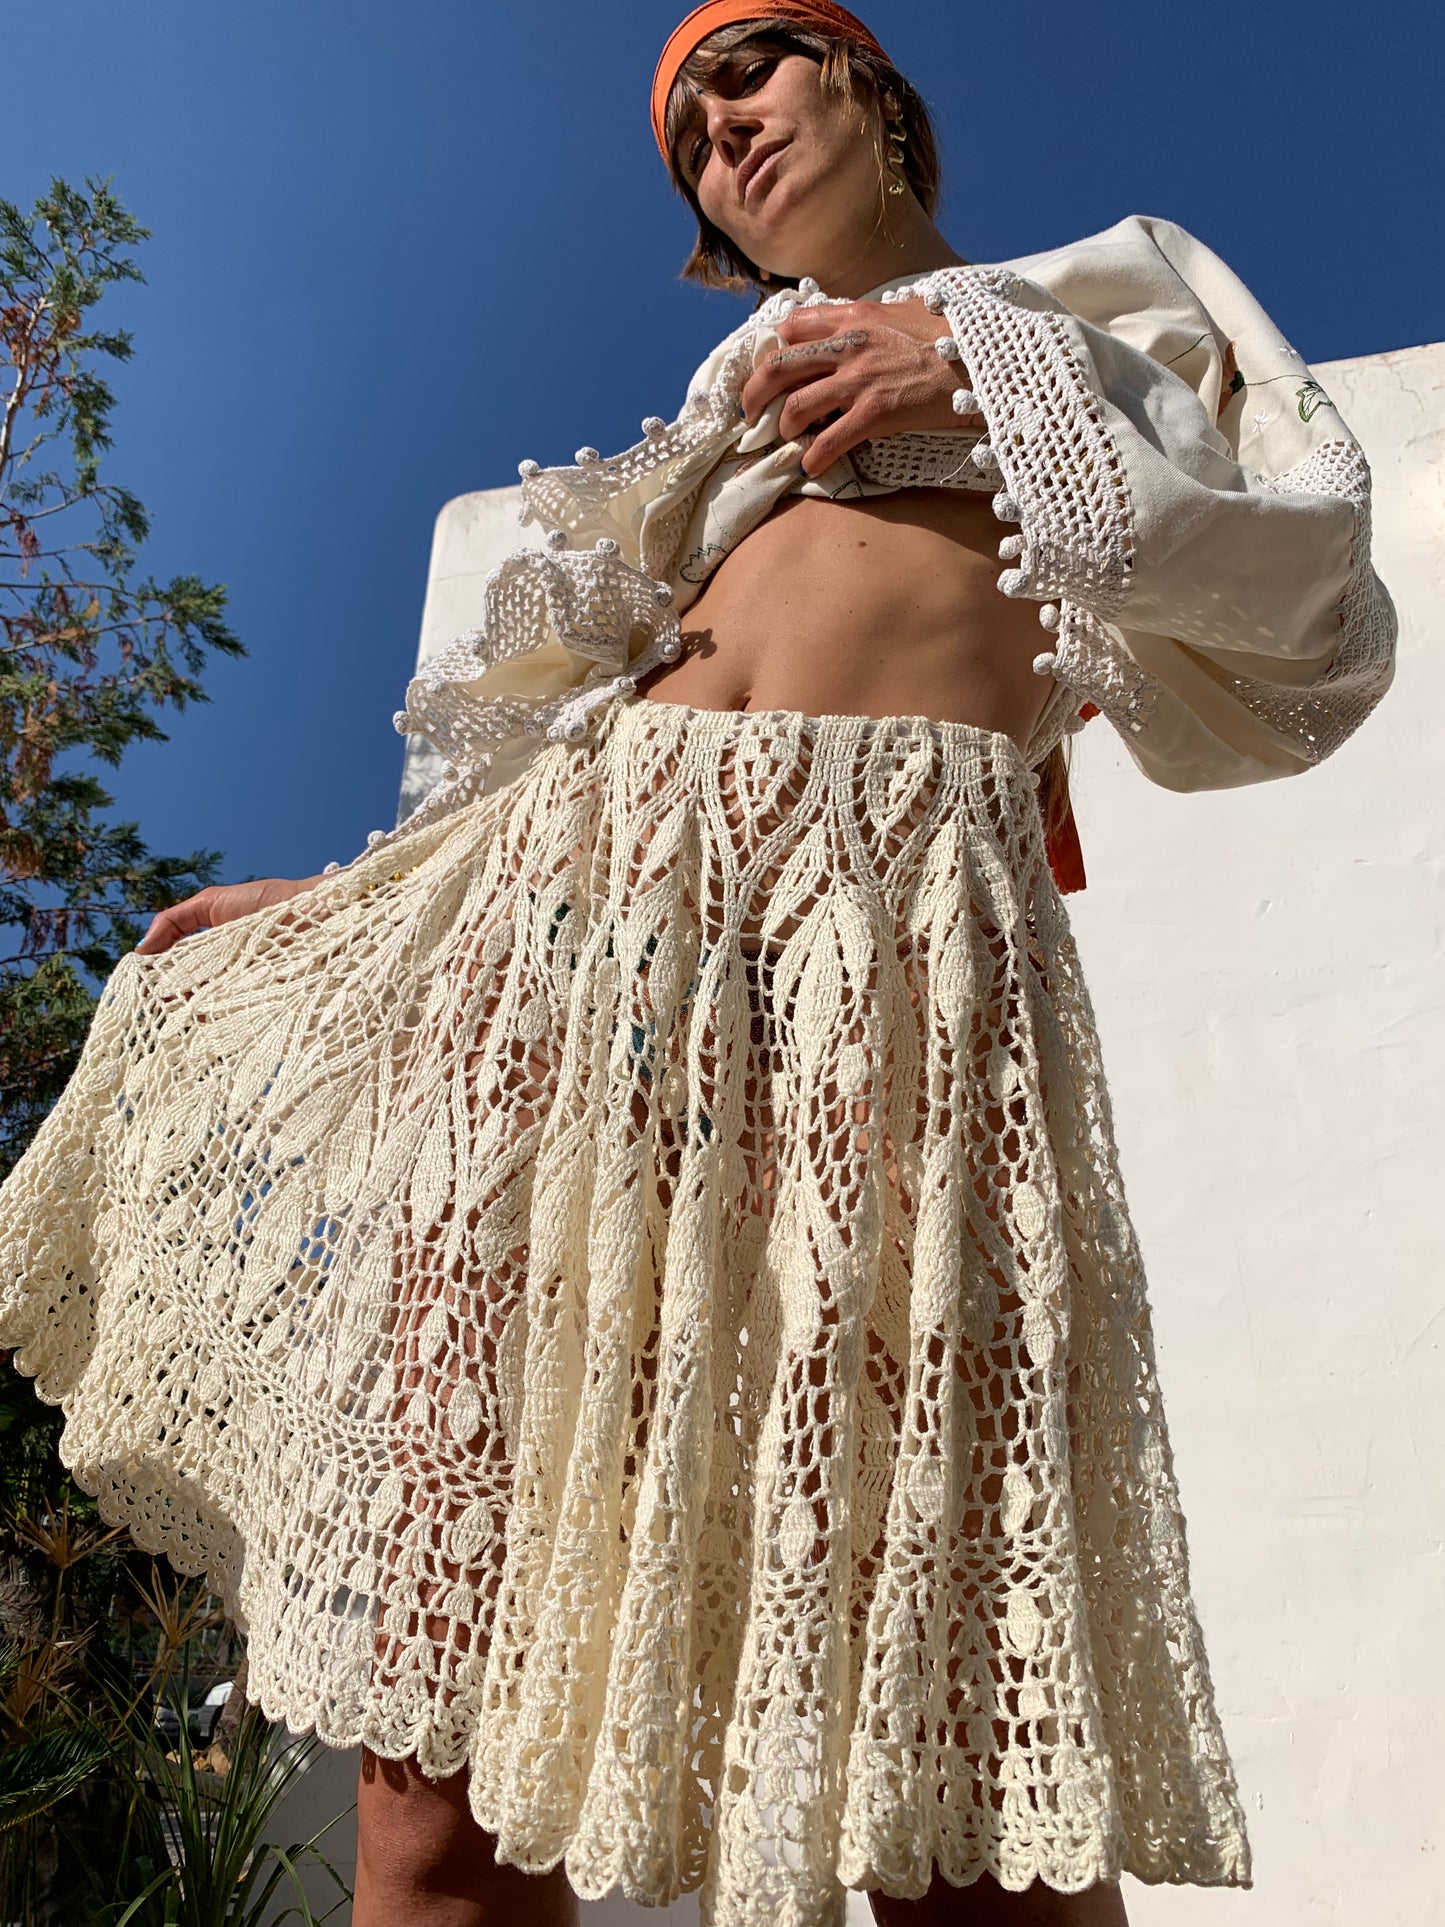 Antique lace crochet skirt up-cycled by Vagabond Ibiza